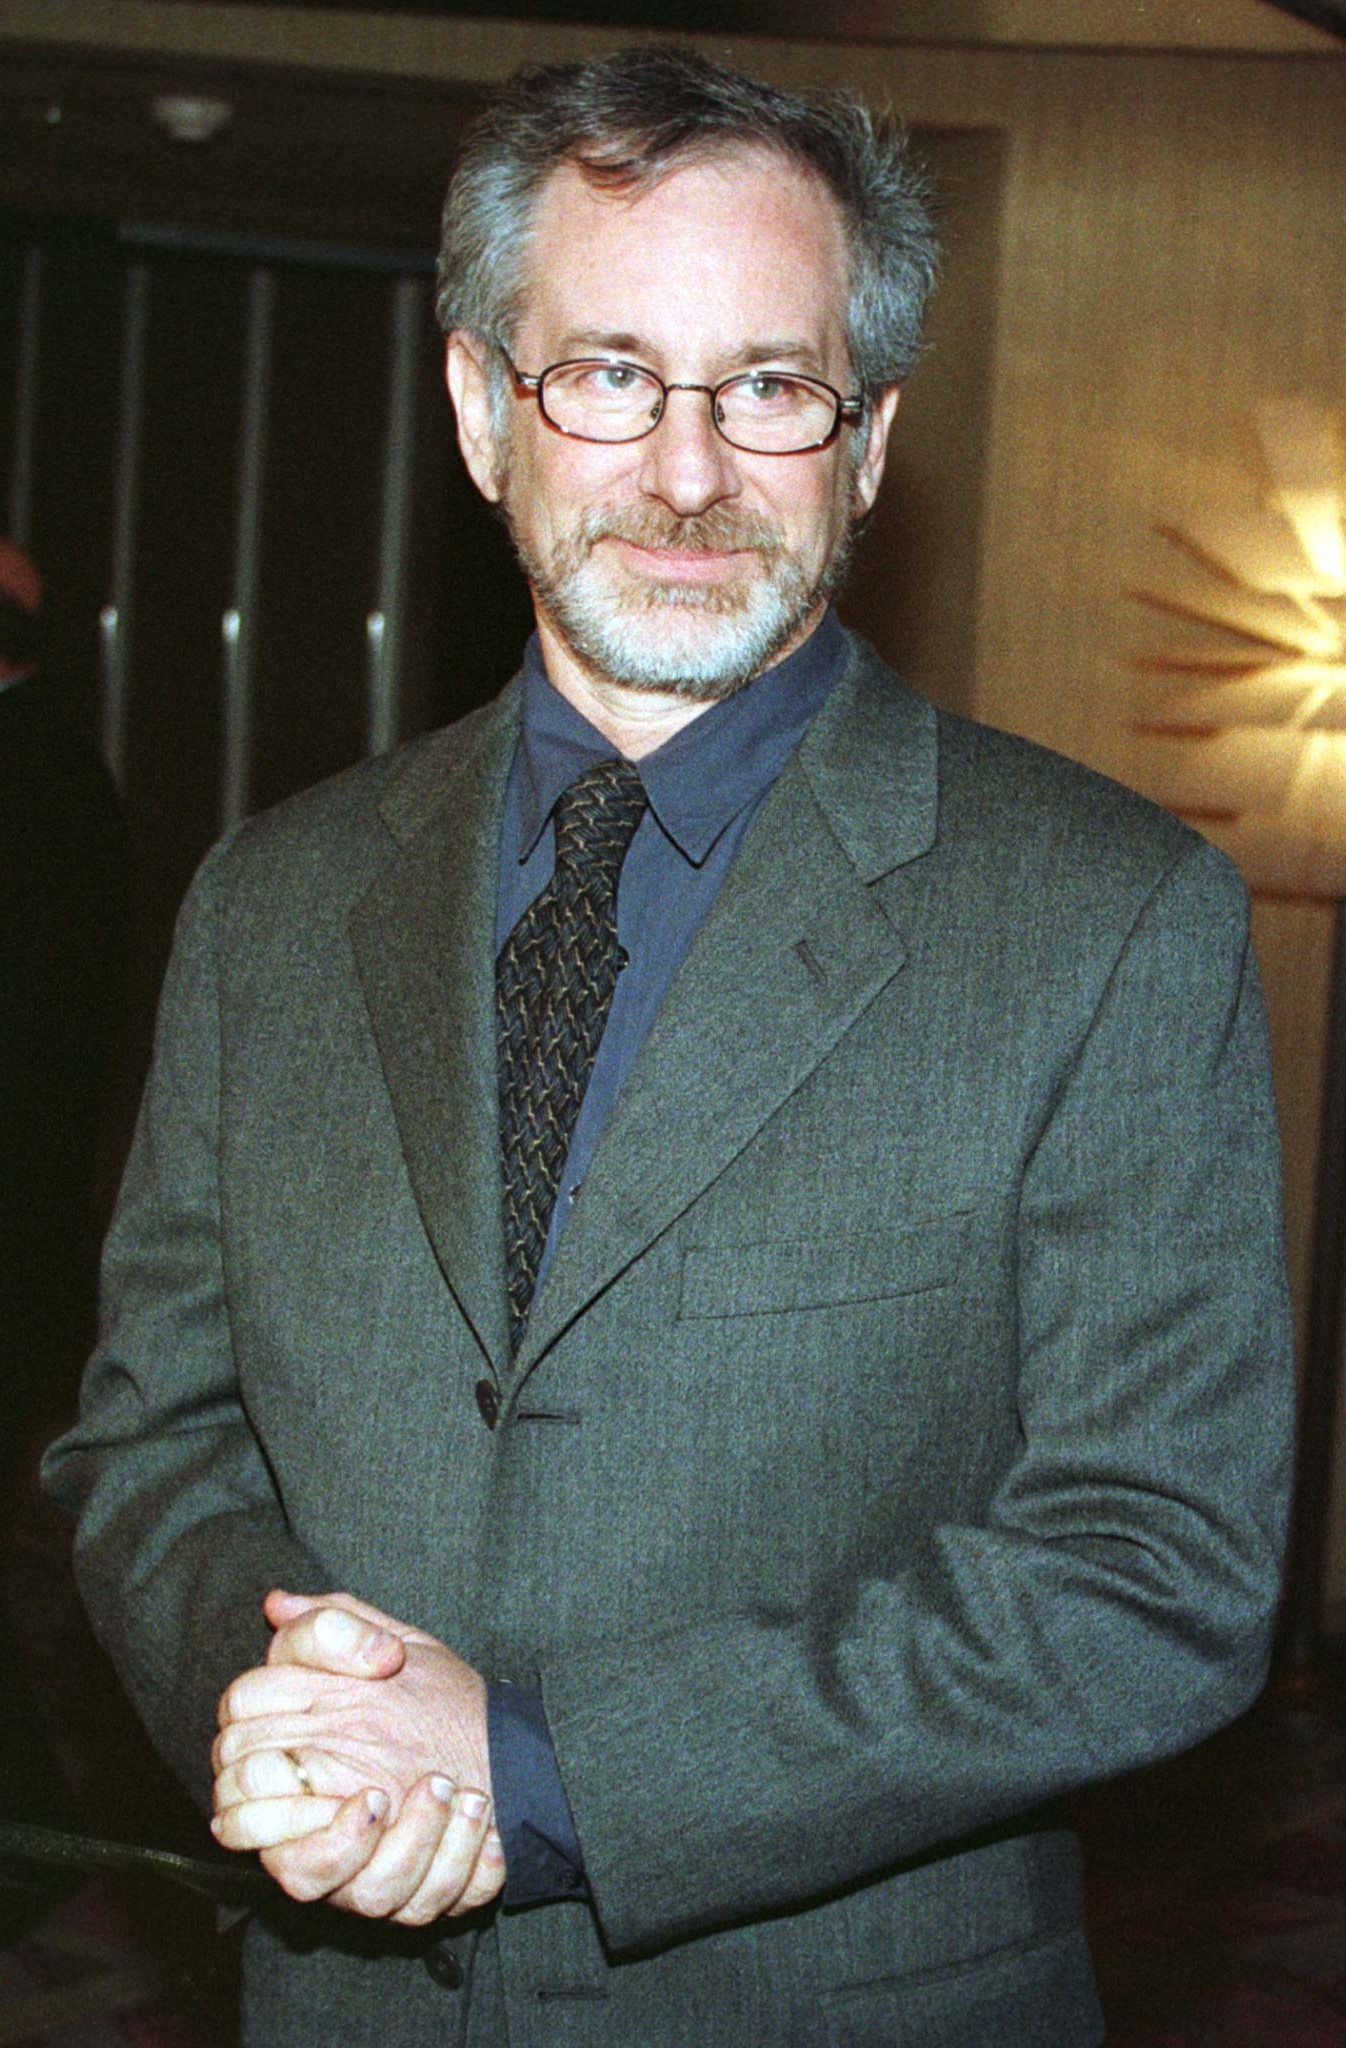 Film director Steven Spielberg poses for photographers at the 64th annual New York film critics circle awards, January 10. Spielberg's film "Saving Private Ryan" received the award for Best Film. JC/SV/CLH/